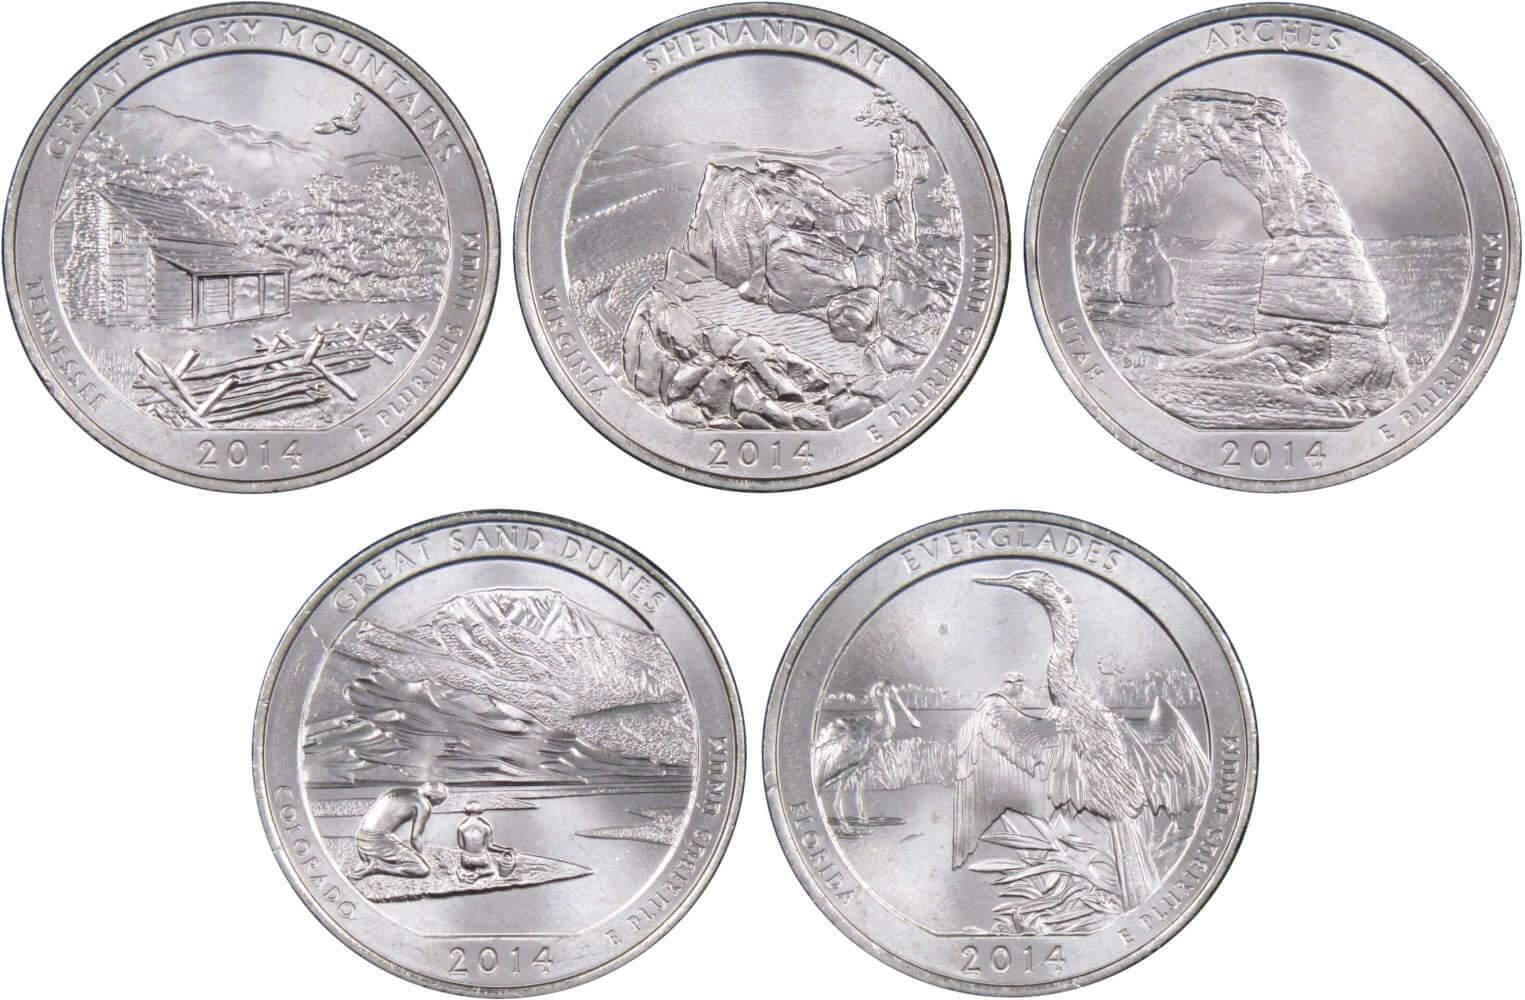 2014 P National Park Quarter 5 Coin Set Uncirculated Mint State 25c Collectible